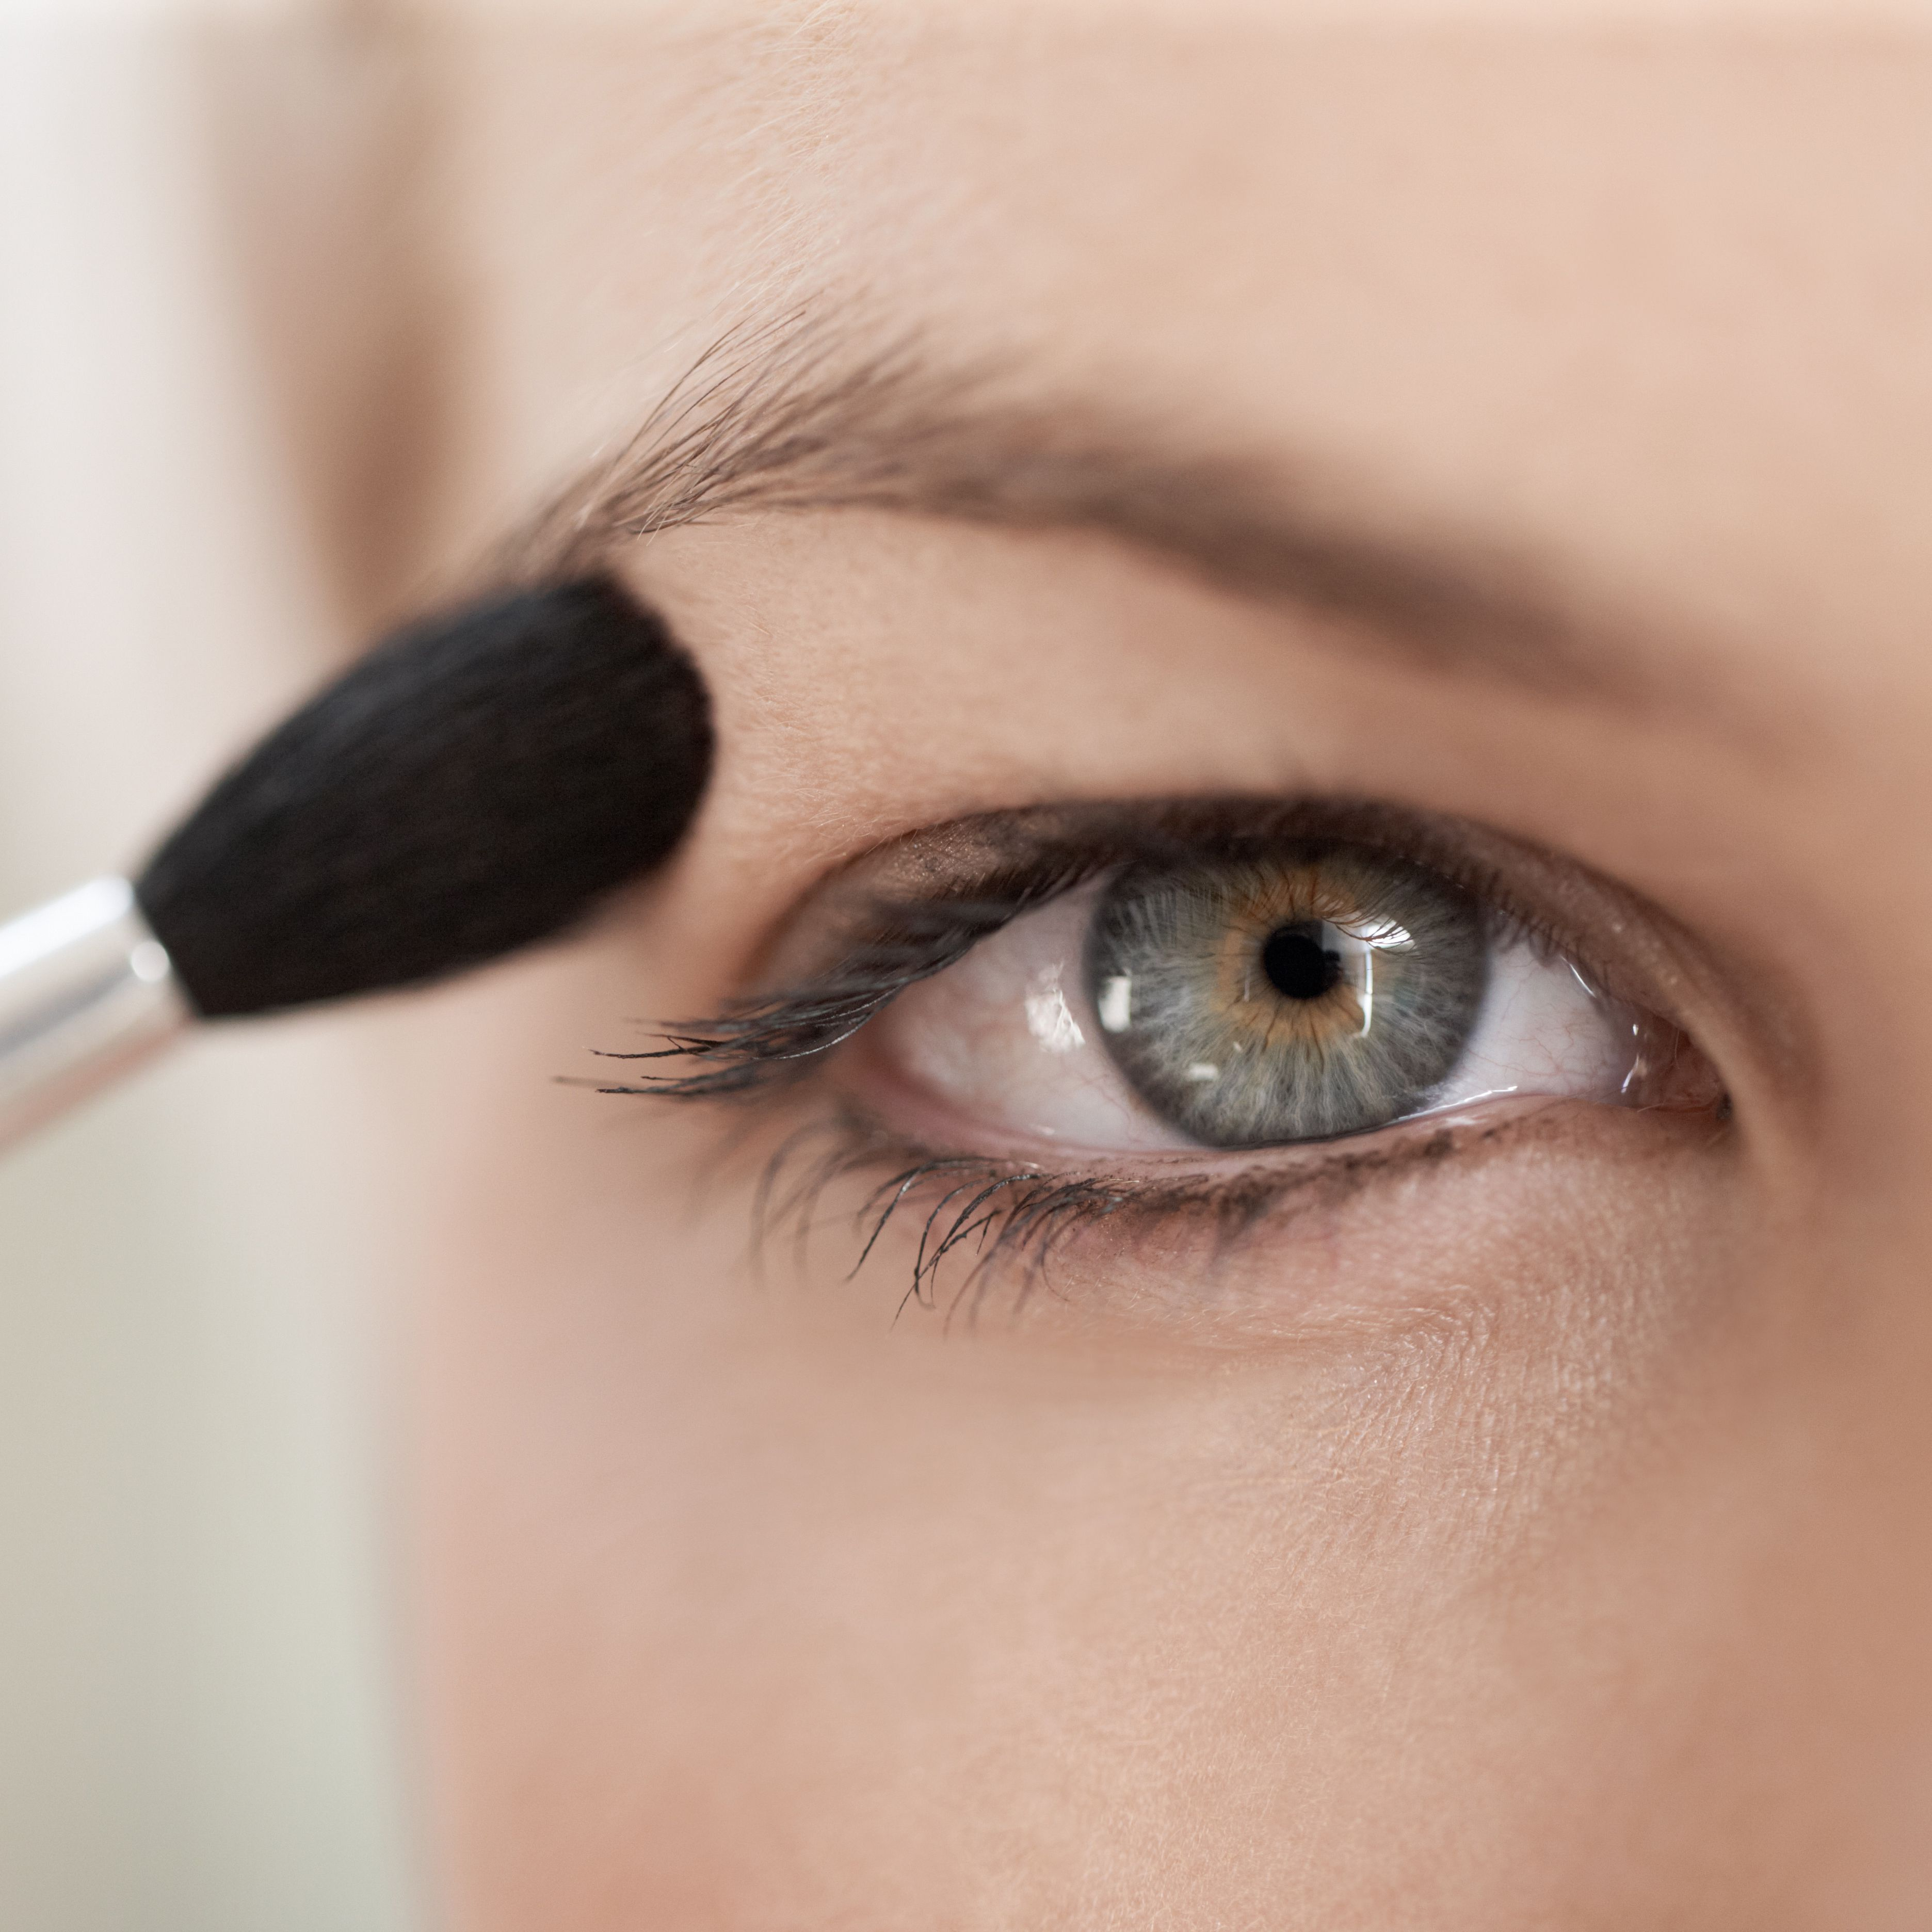 Makeup Ideas For Brown Eyes Makeup Tricks For Hooded Eyes Hooded Eyes Makeup Tips And Tricks